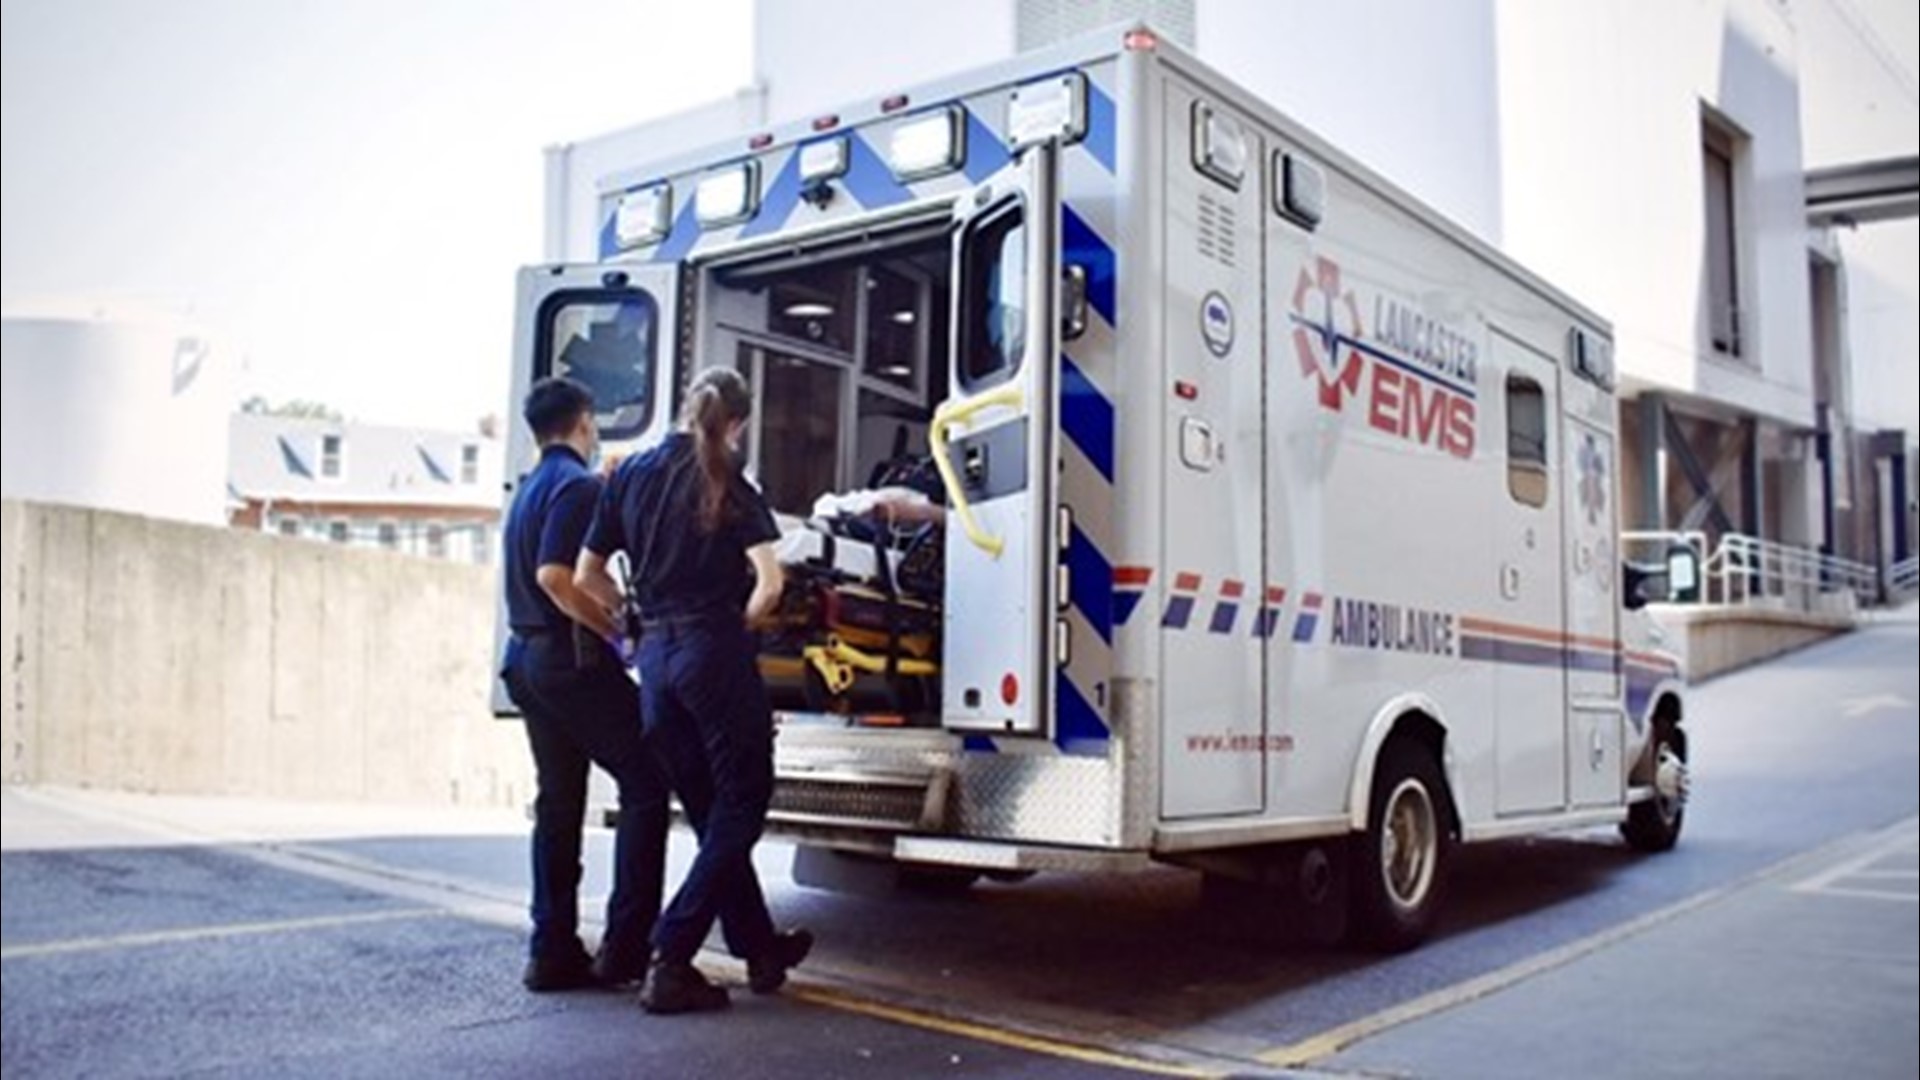 Many people believe they will be seen quicker in the emergency room if they come in by ambulance.